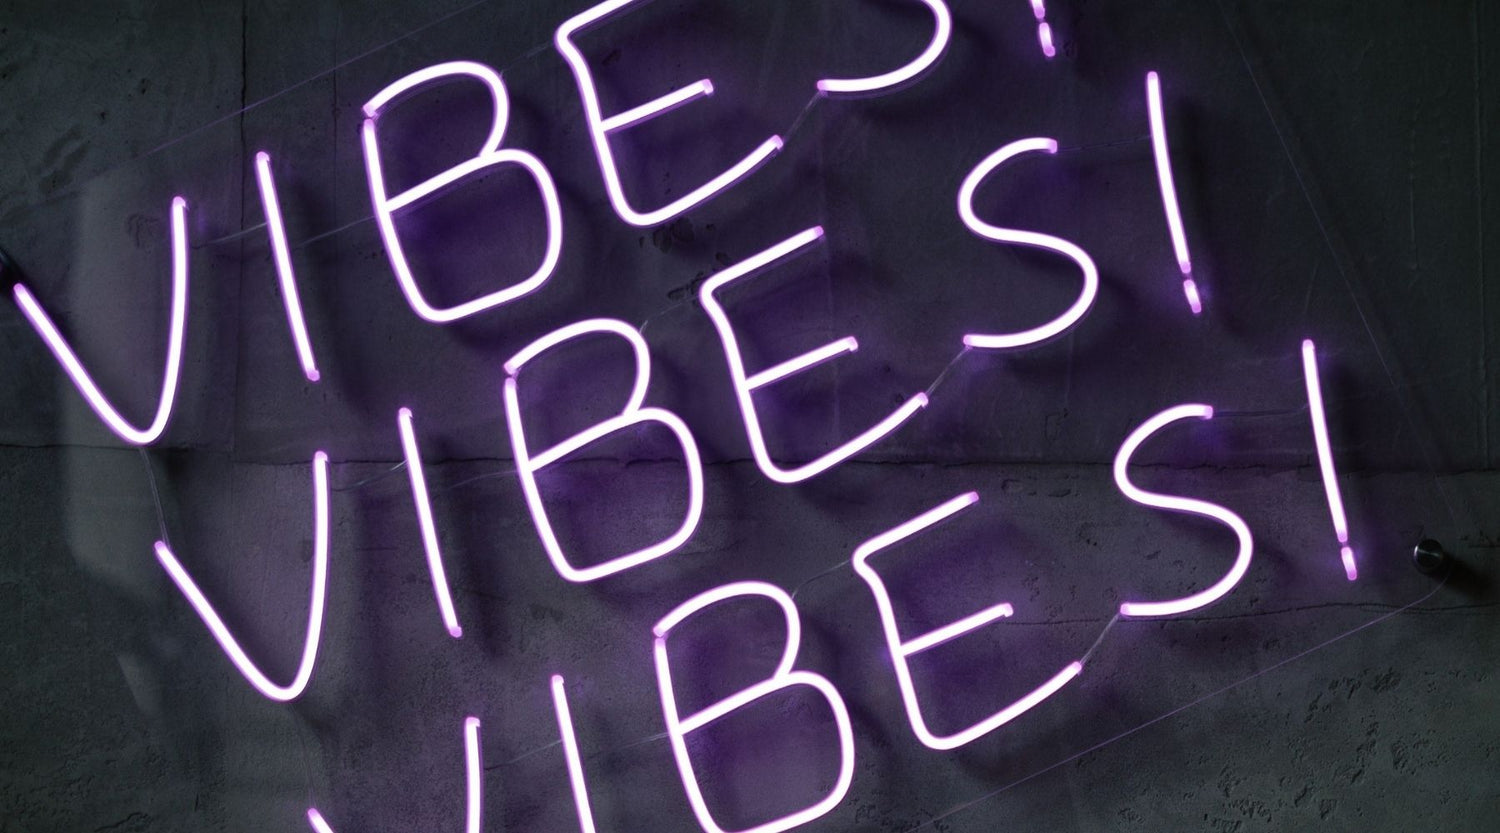 vibes vibes vibes neon sign